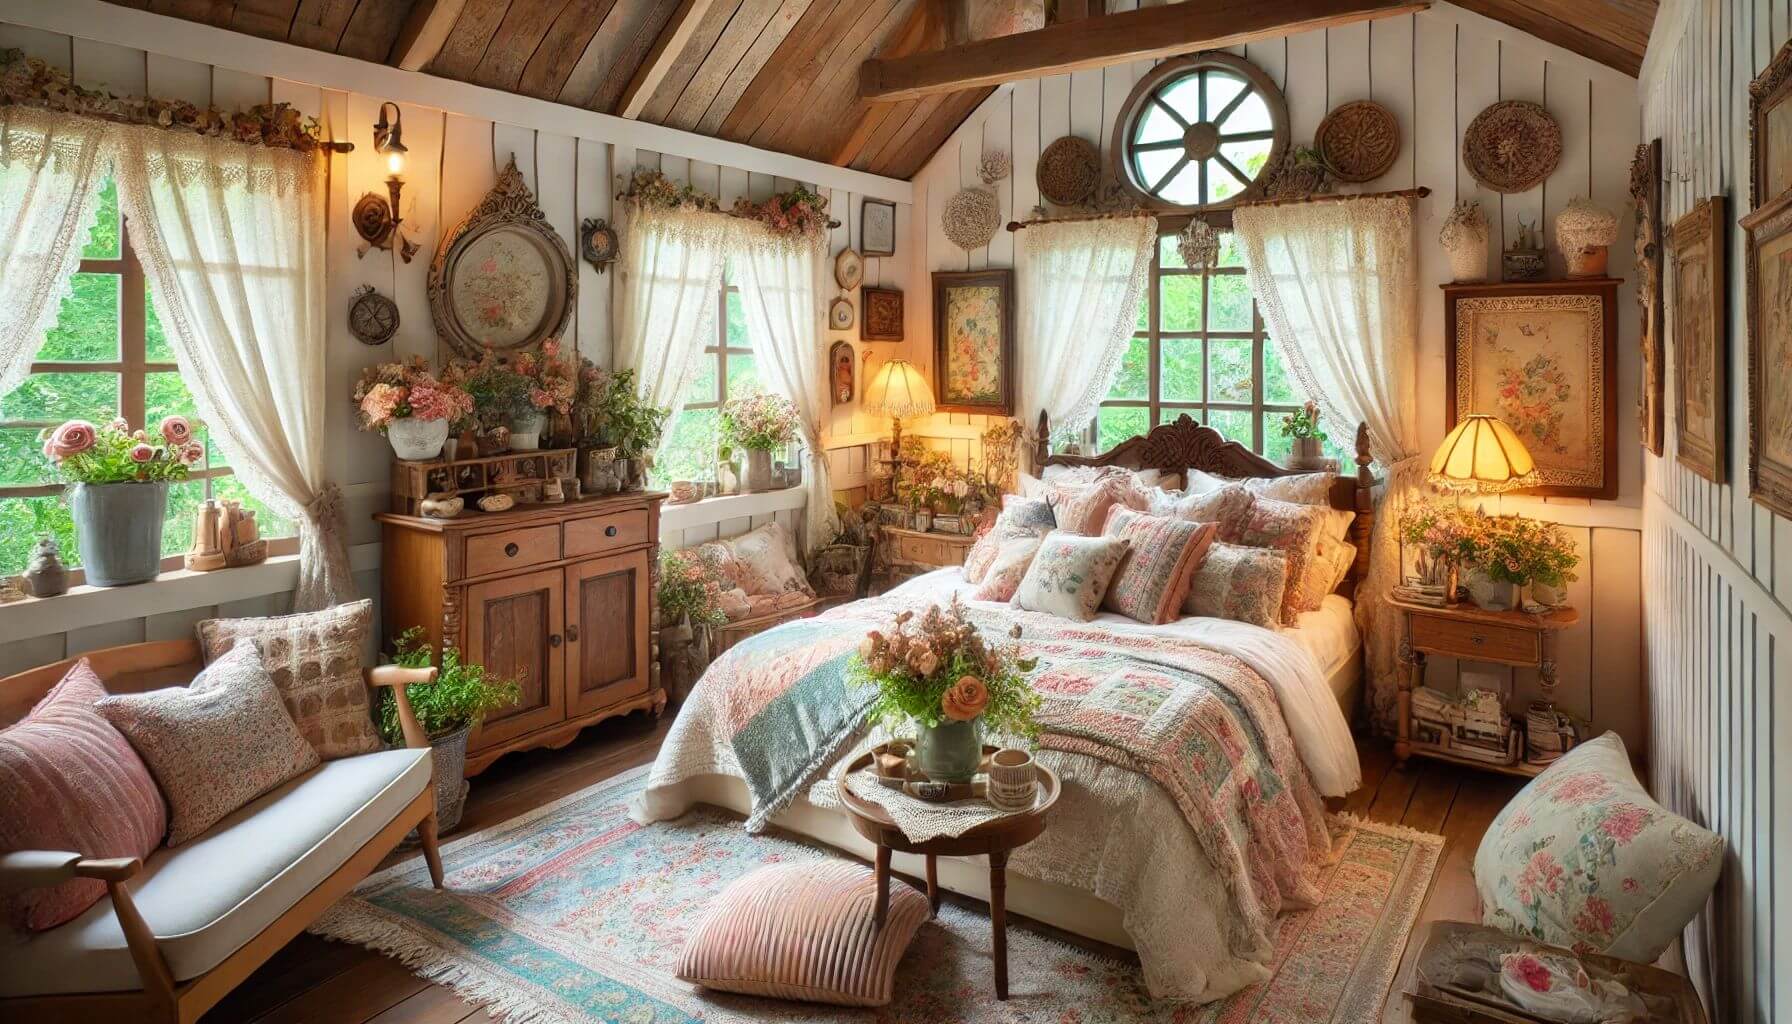 How to Design Cottagecore Bedroom: 21 Ideas for a Cozy Retreat